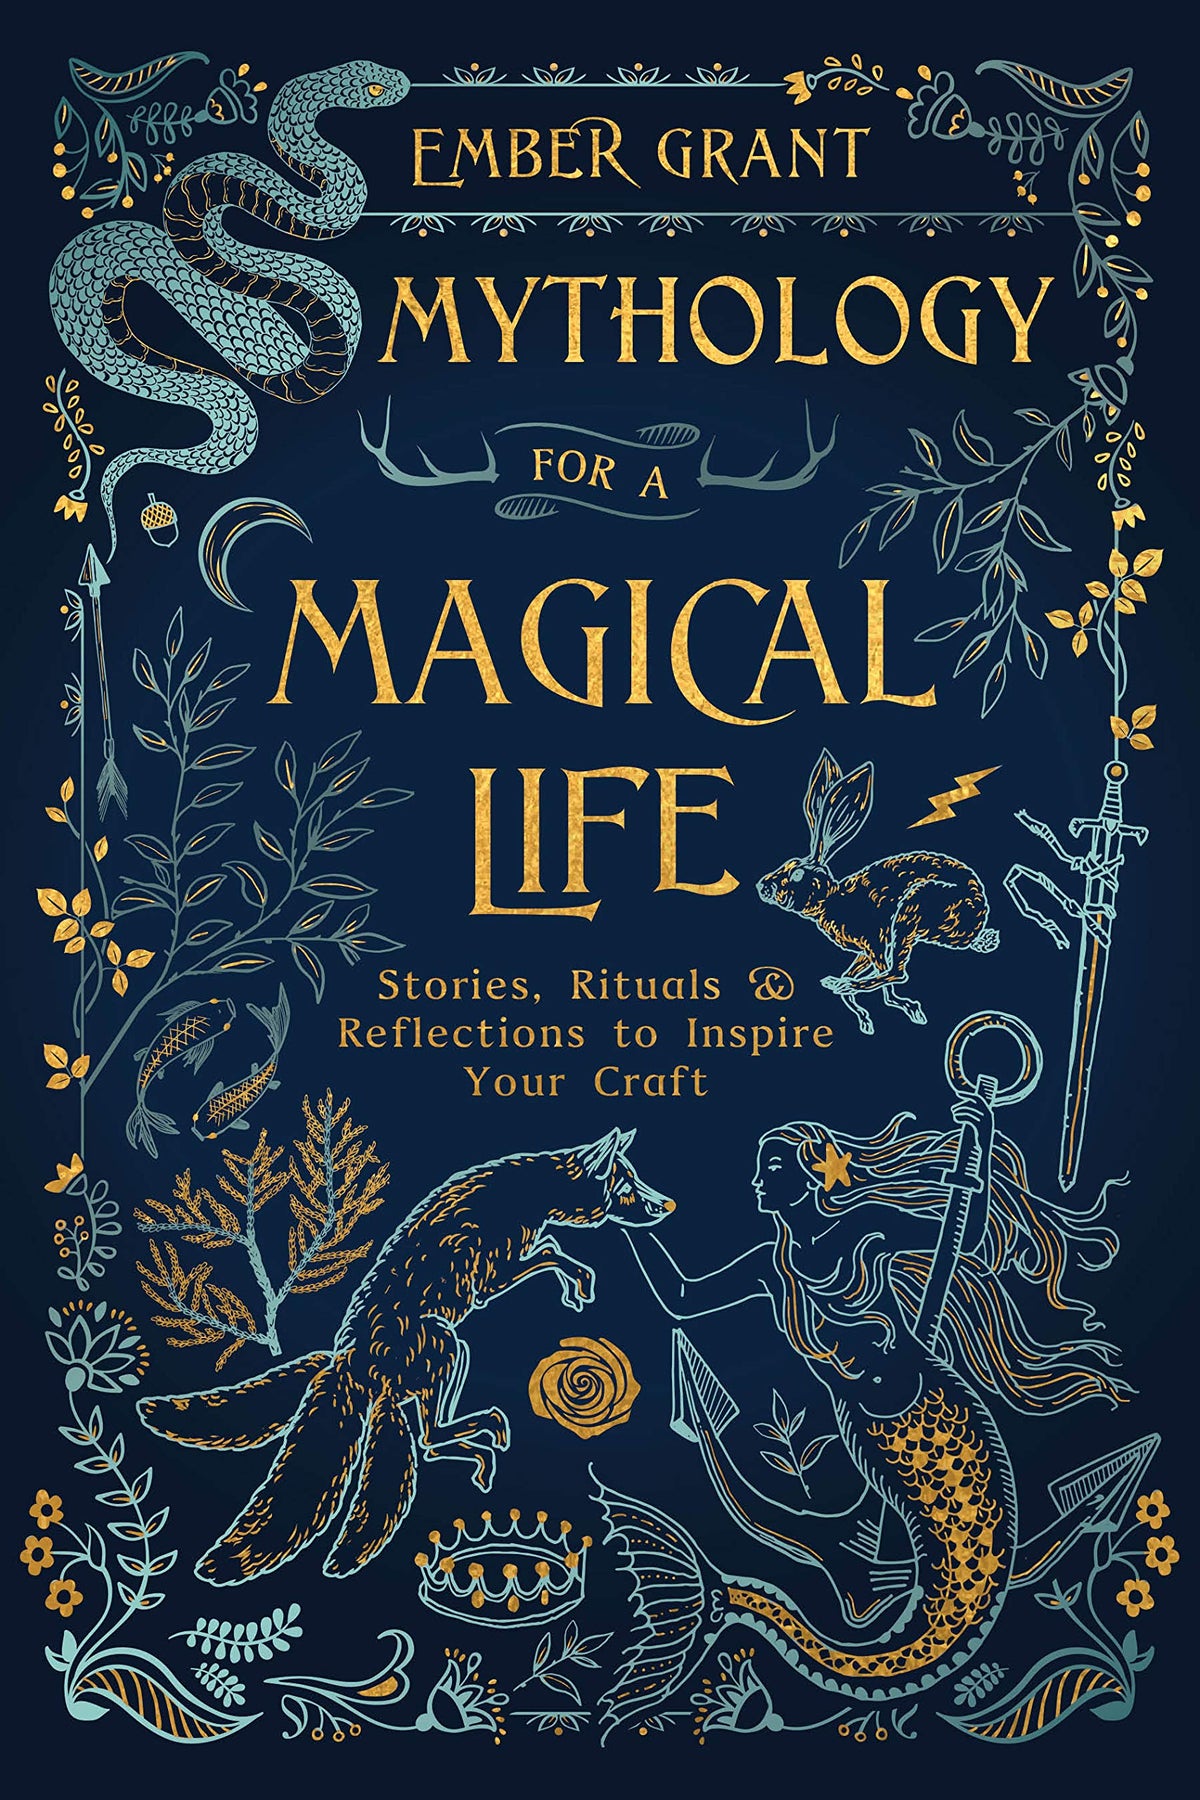 Mythology for a Magical Life: Stories, Rituals &amp; Reflections to Inspire Your Craft